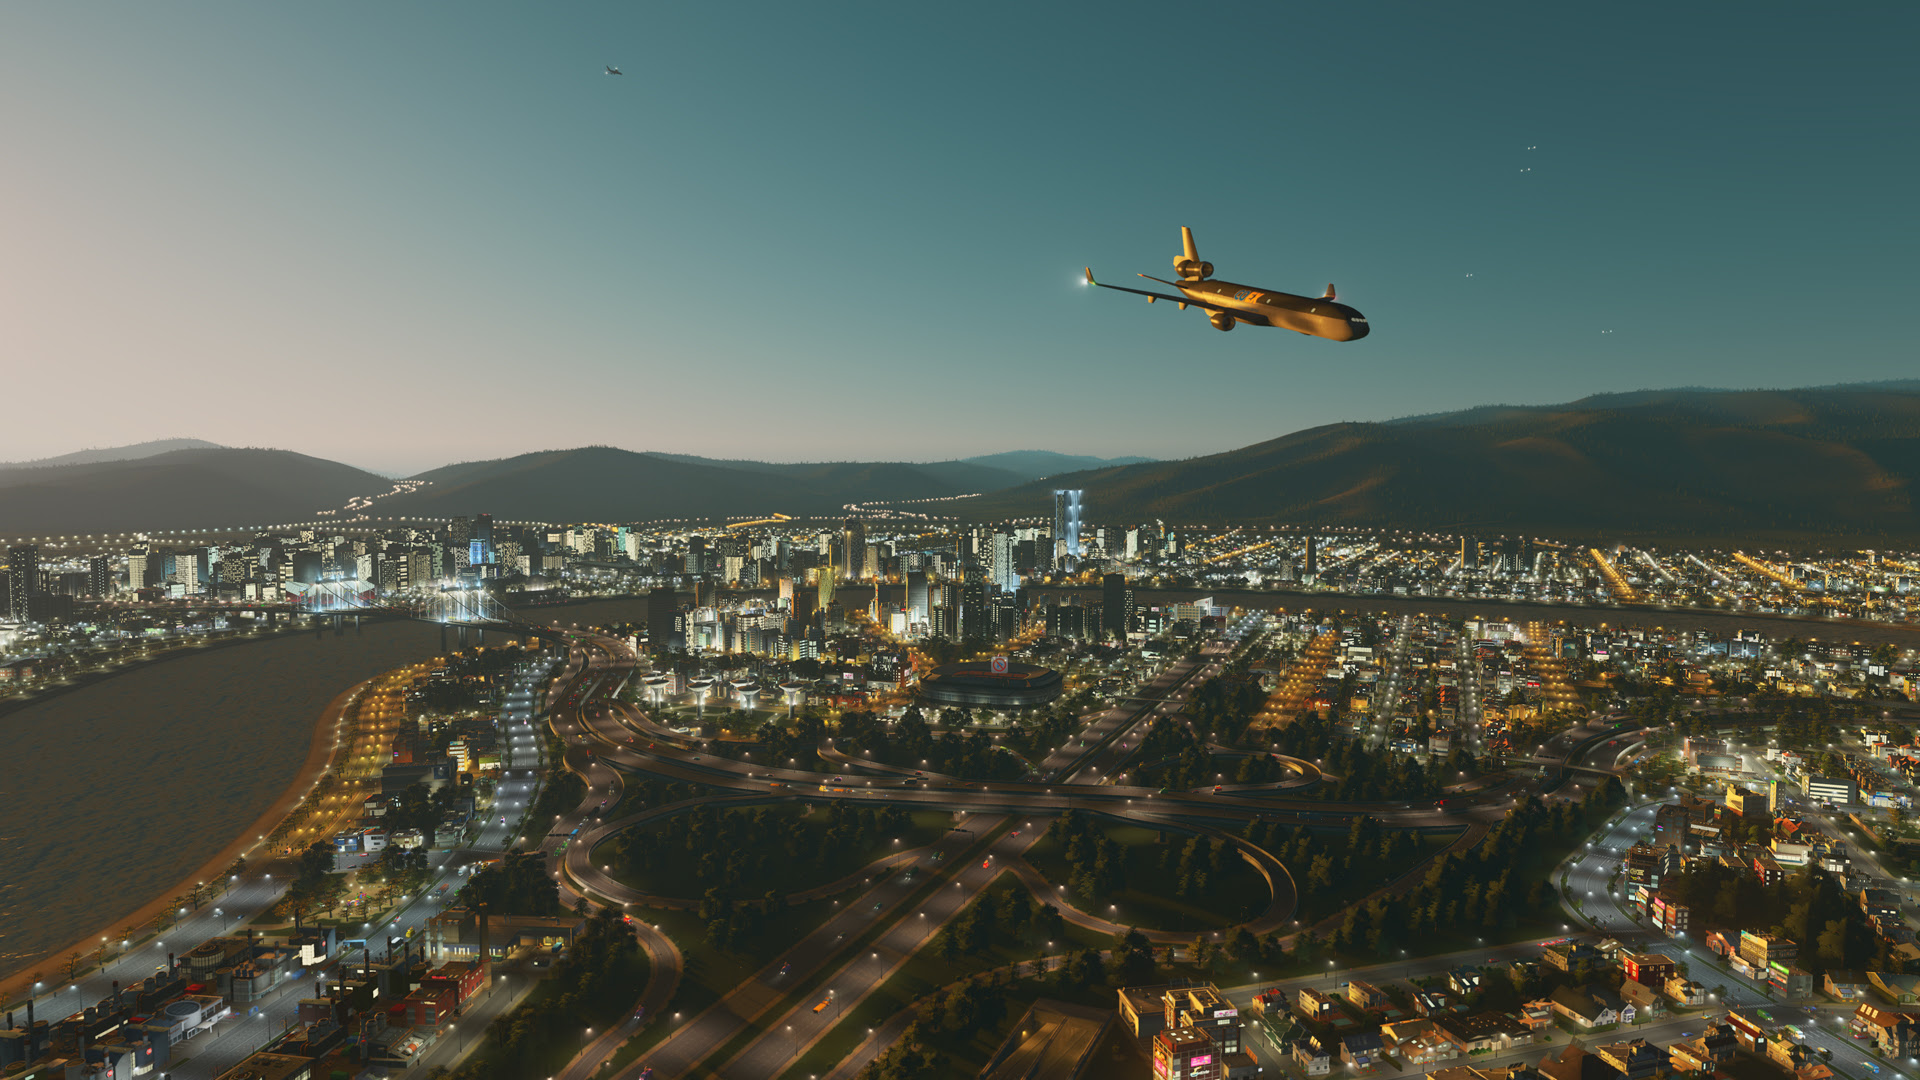 Cities: Skylines Airports DLC has arrived on time